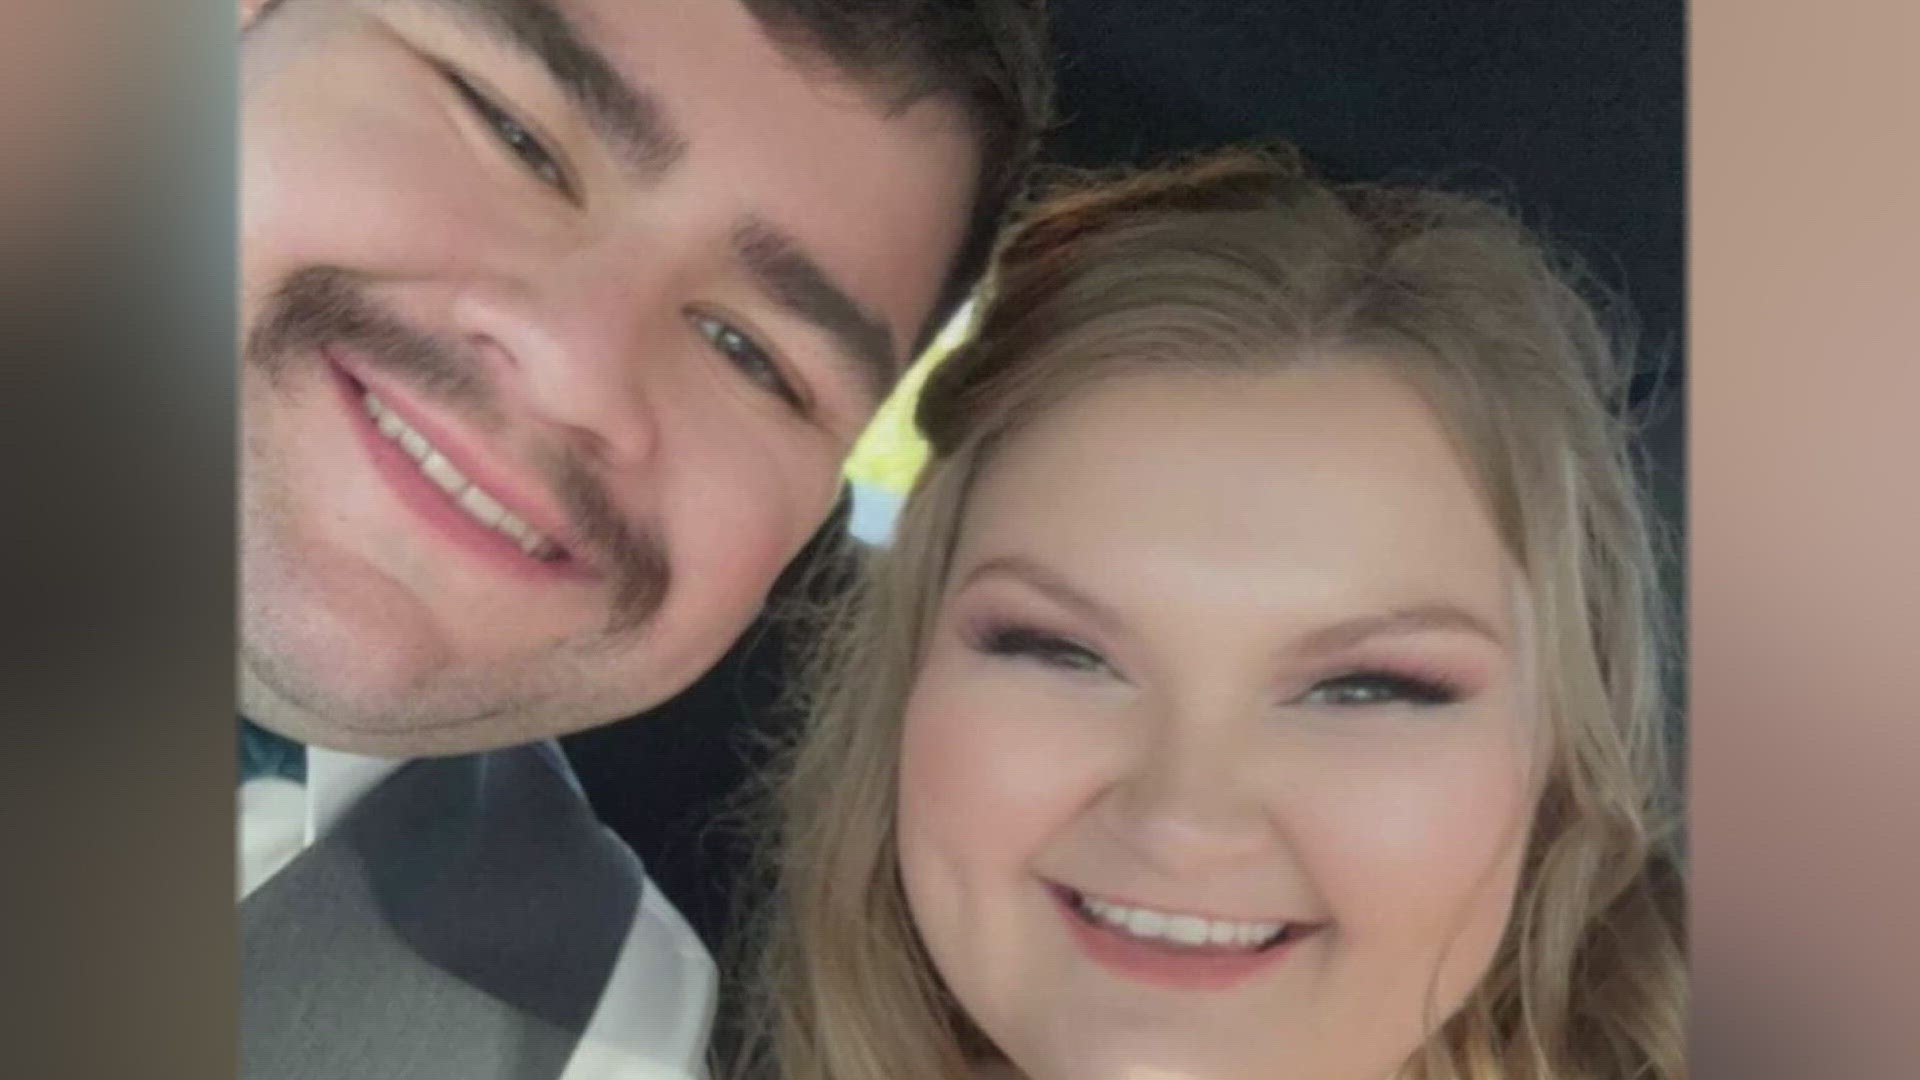 Wilkes County Sheriff's Office said Jenna Boles and Daniel Long were dating.